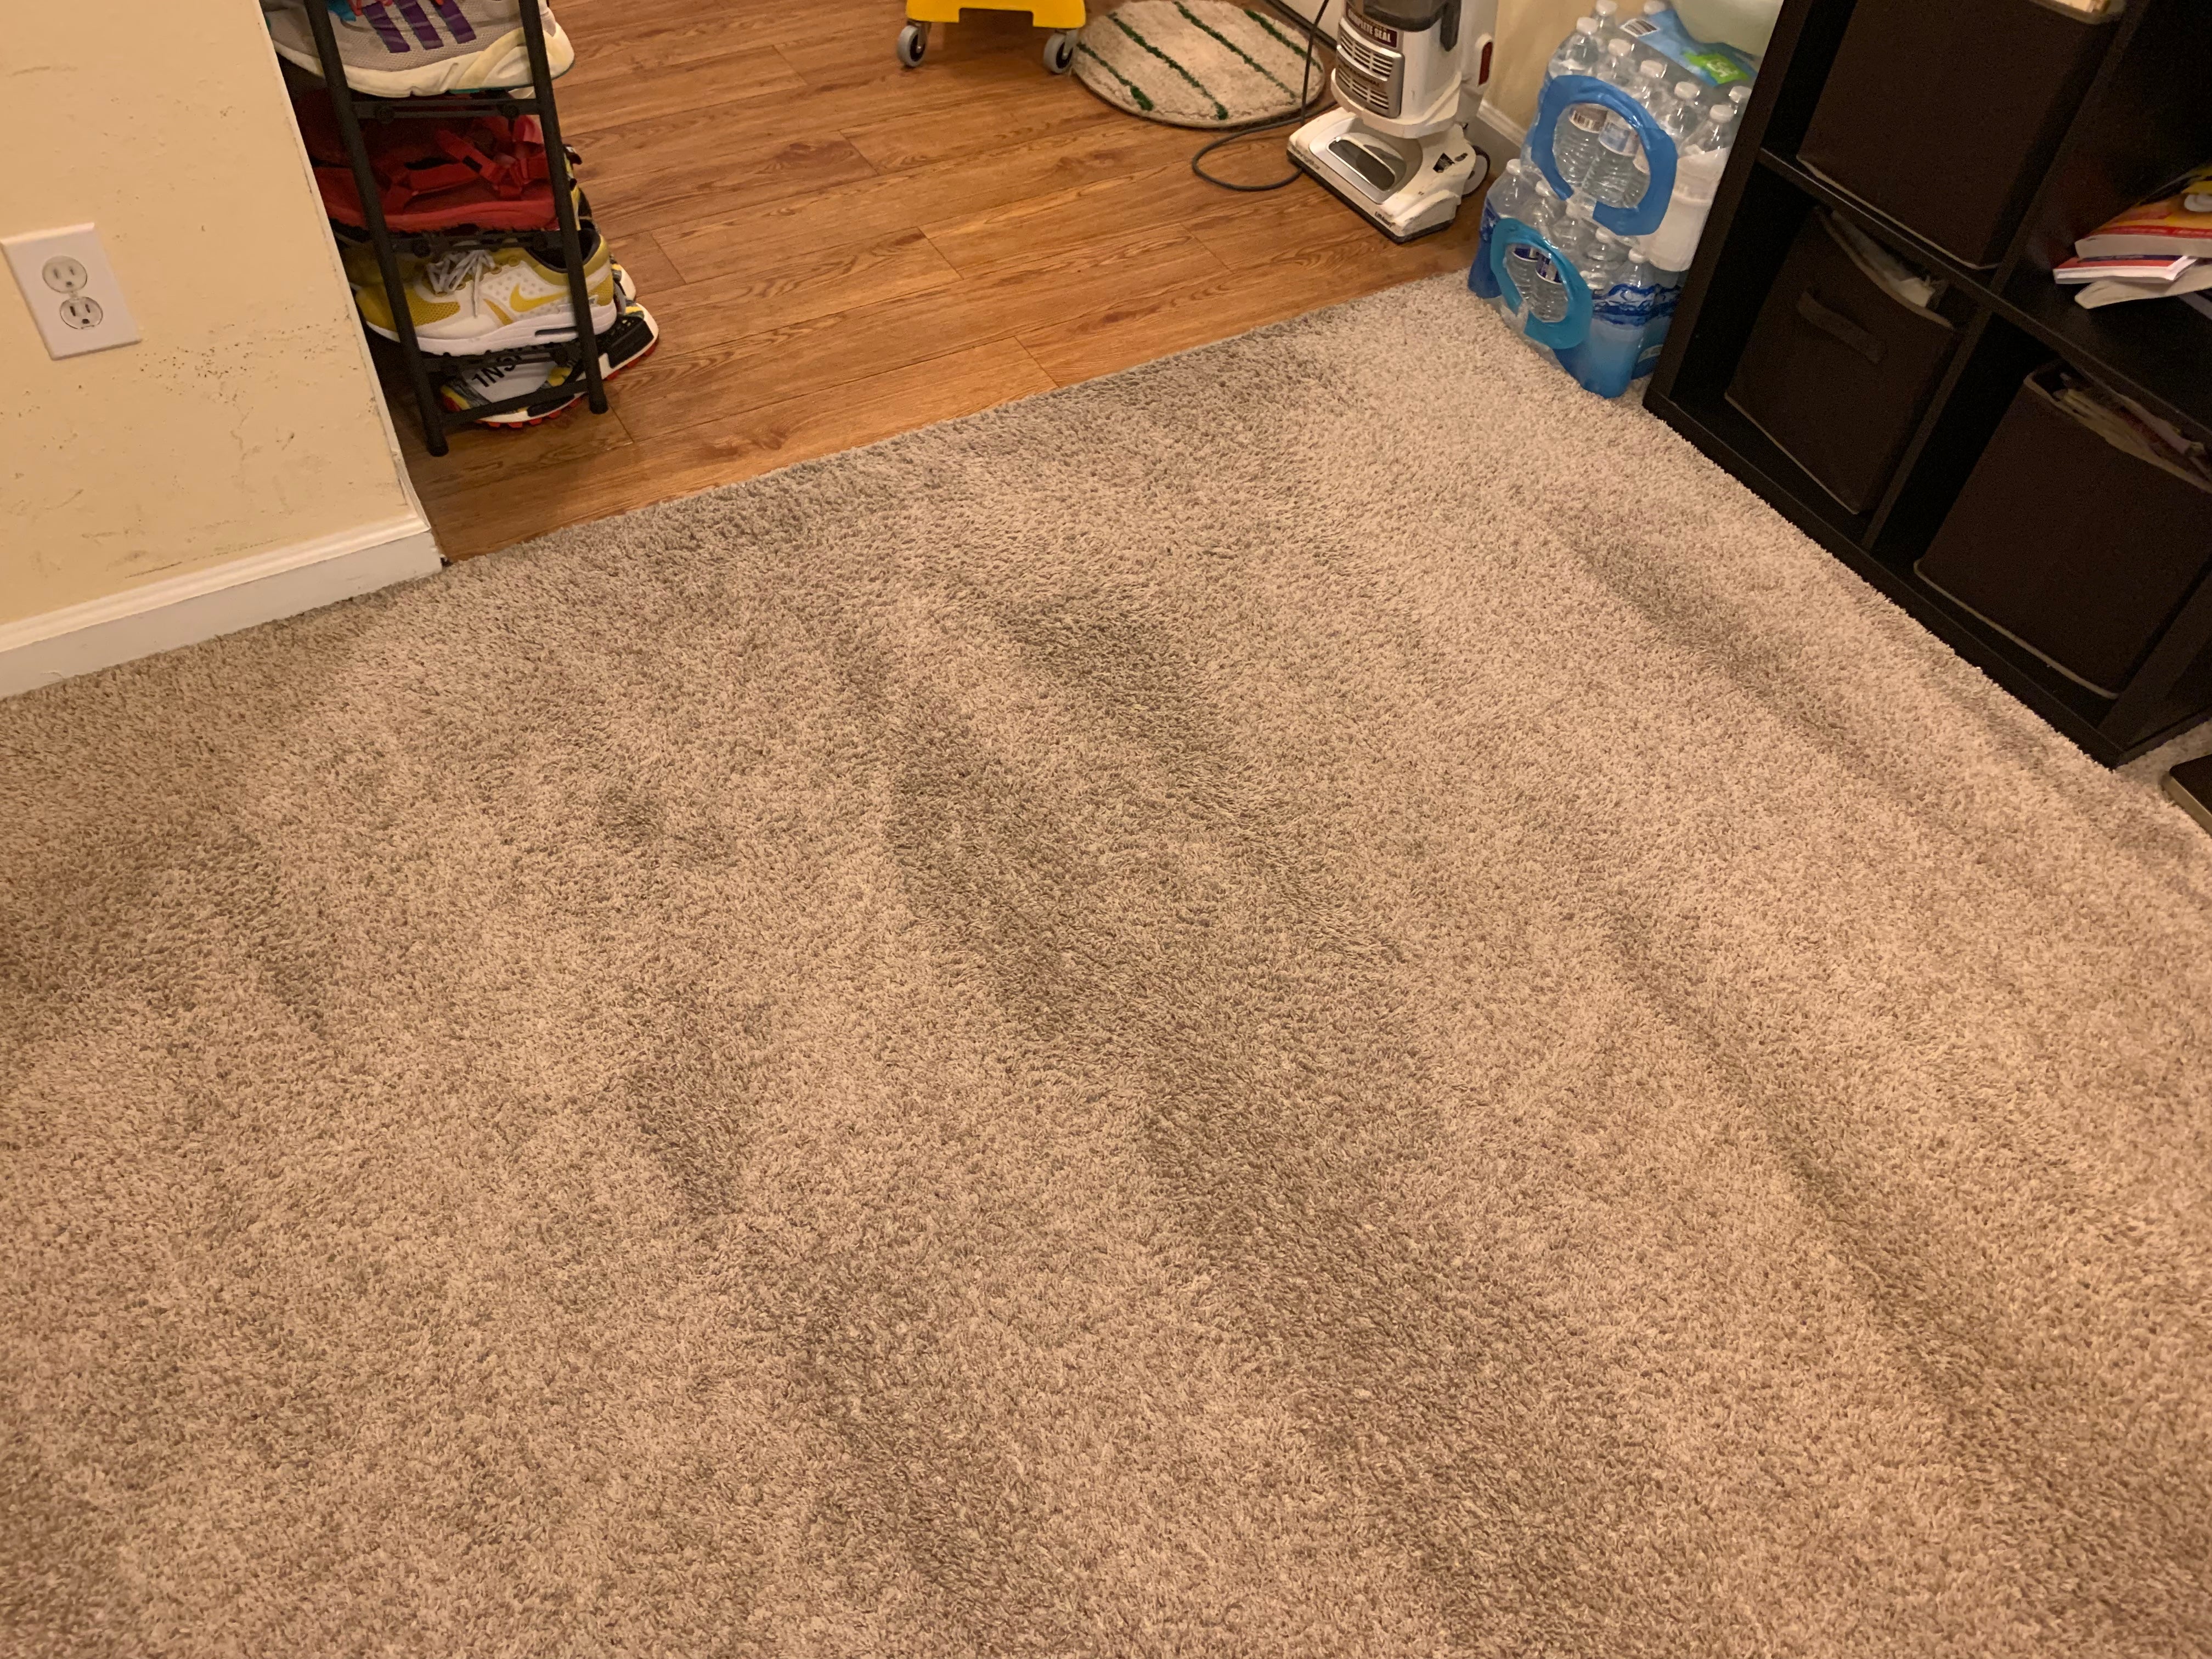 Quarterly Complete Carpet Cleaning Subscription